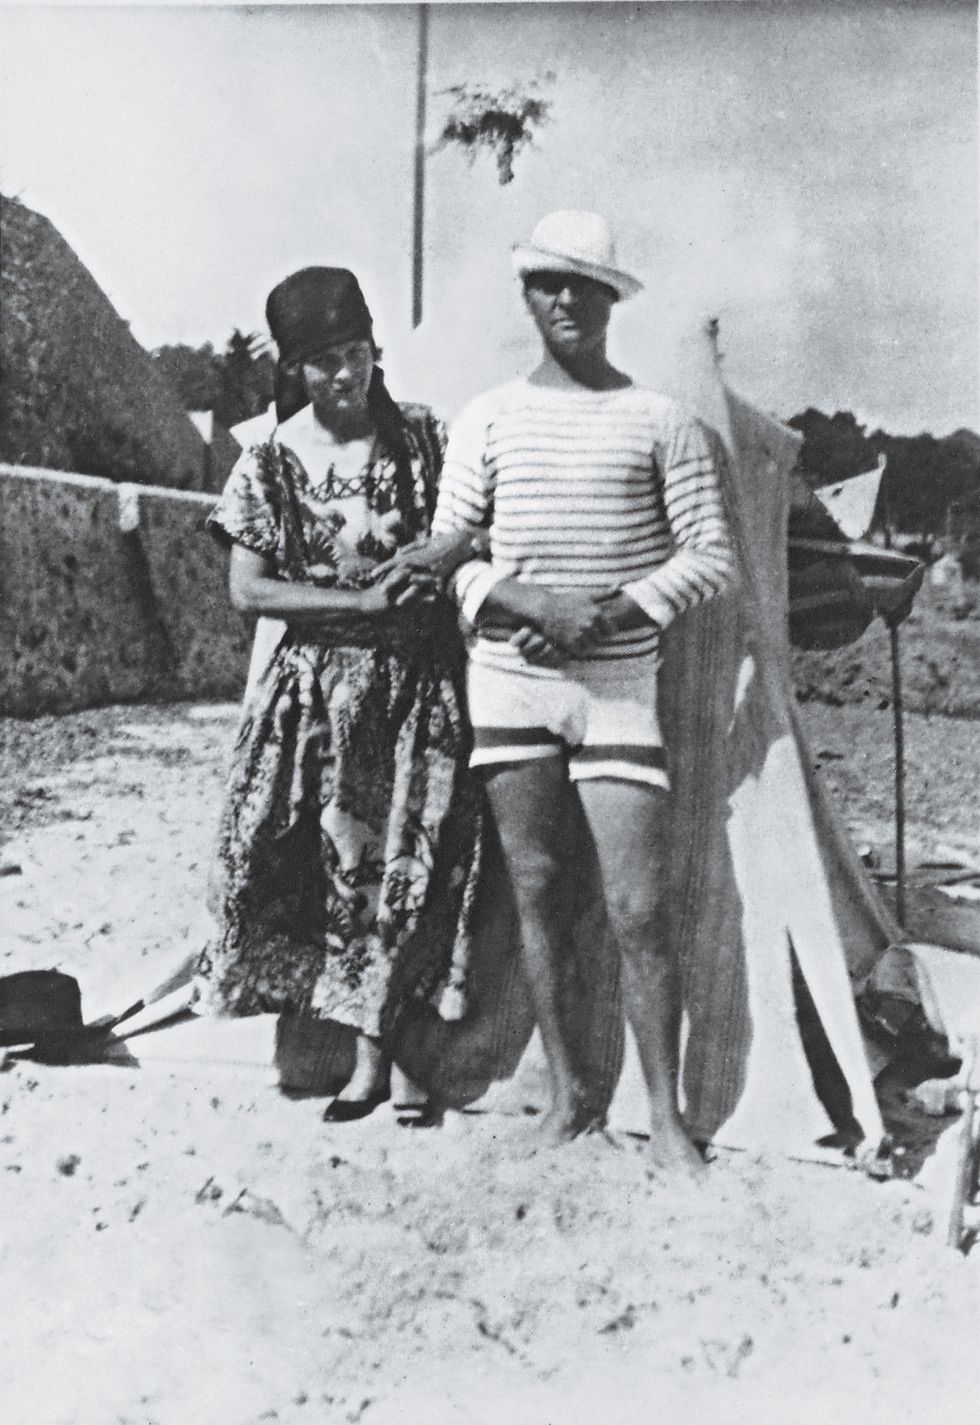 sara and gerald murphy in antibes, france, in the 1920s photographed by pablo picasso